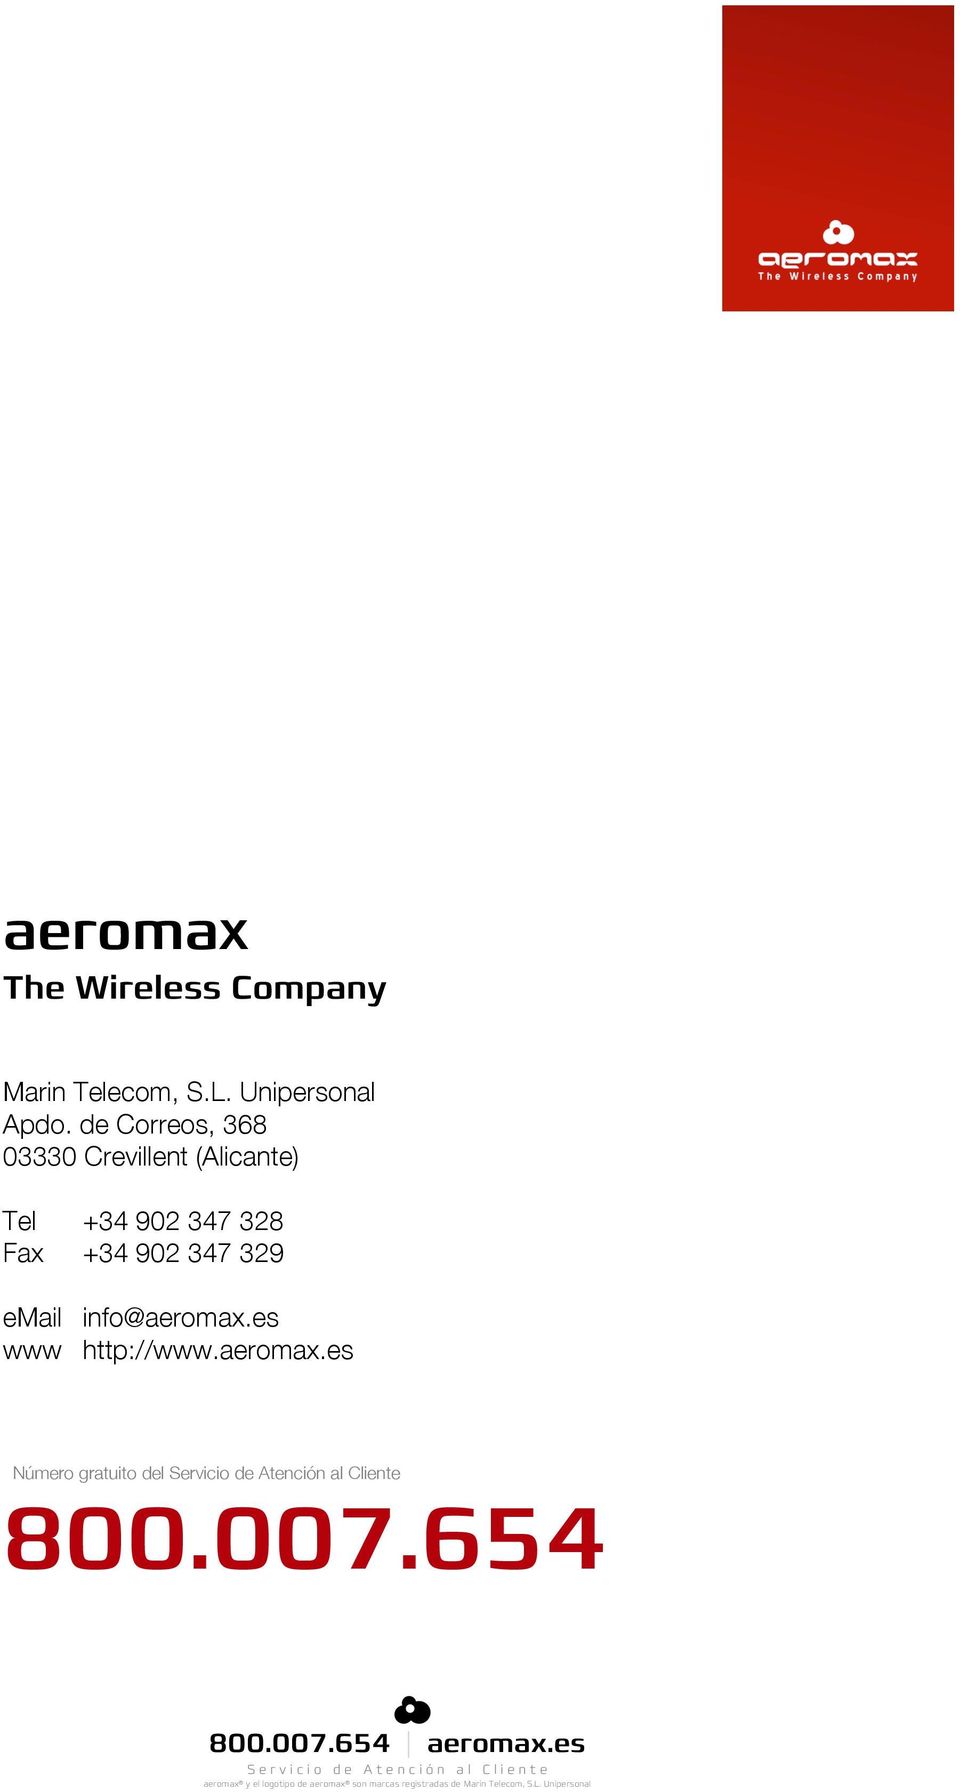 Fax +34 902 347 329 email info@aeromax.